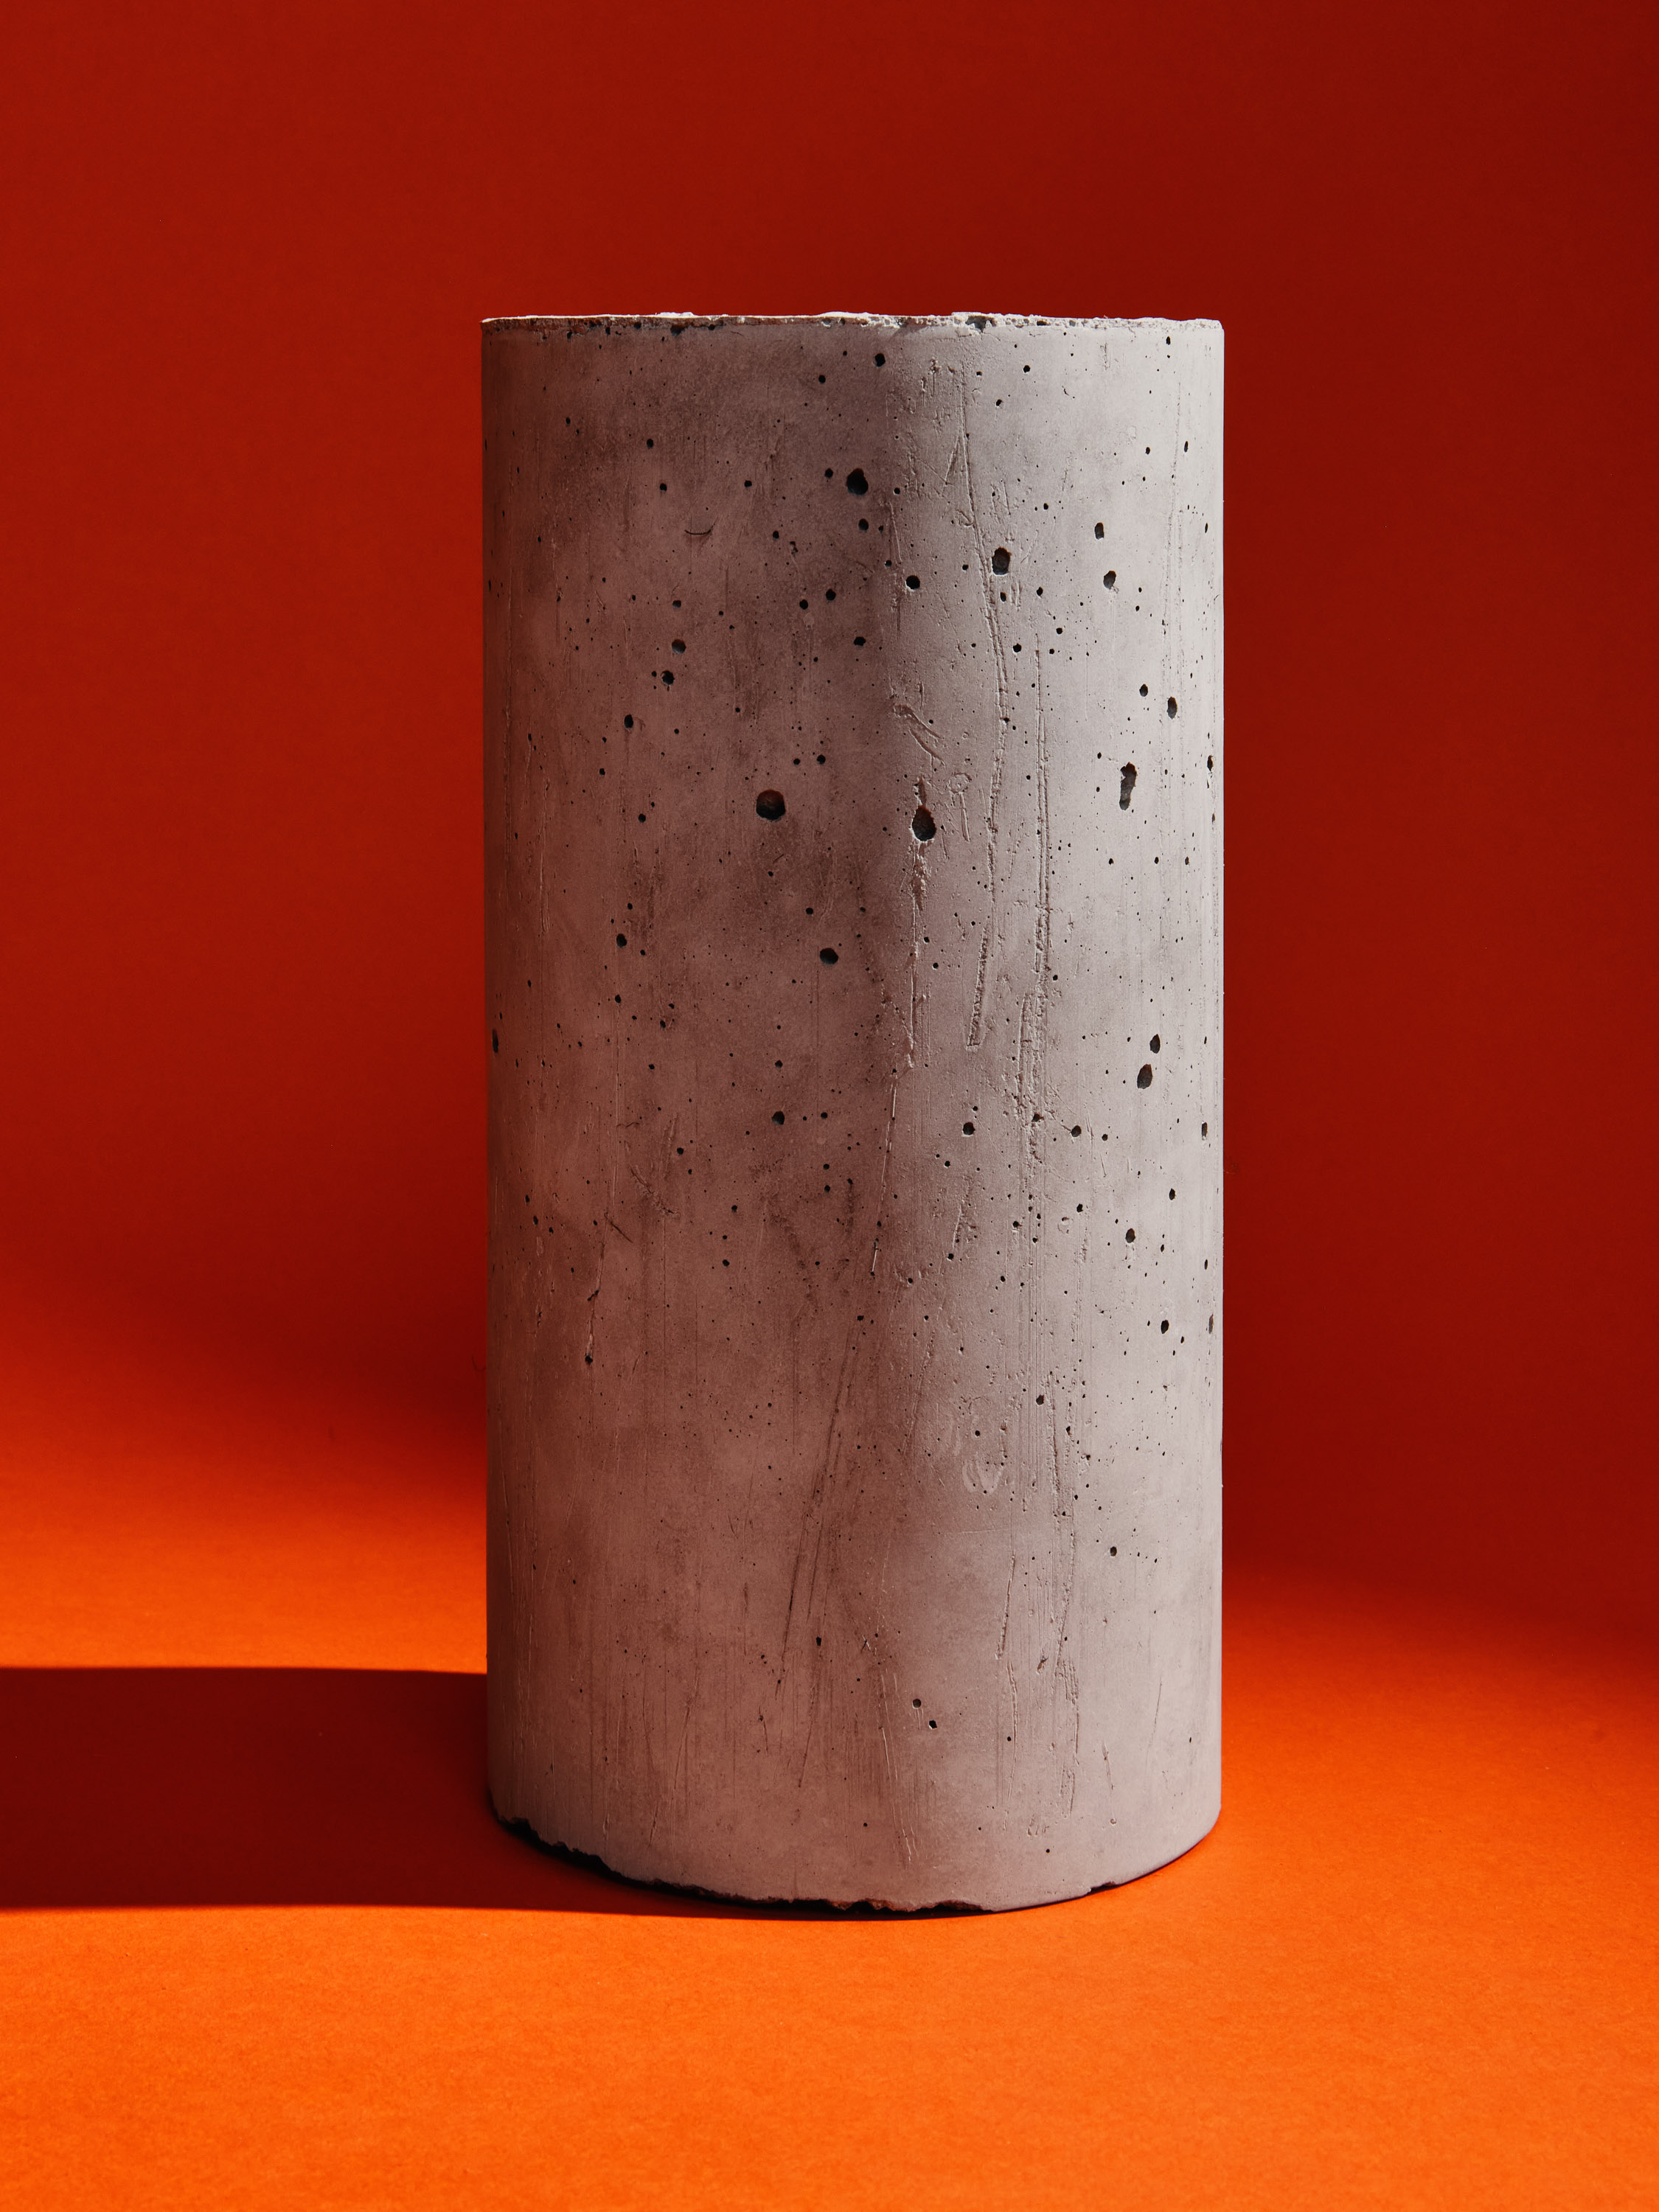 Cured cement in a cylindrical shape